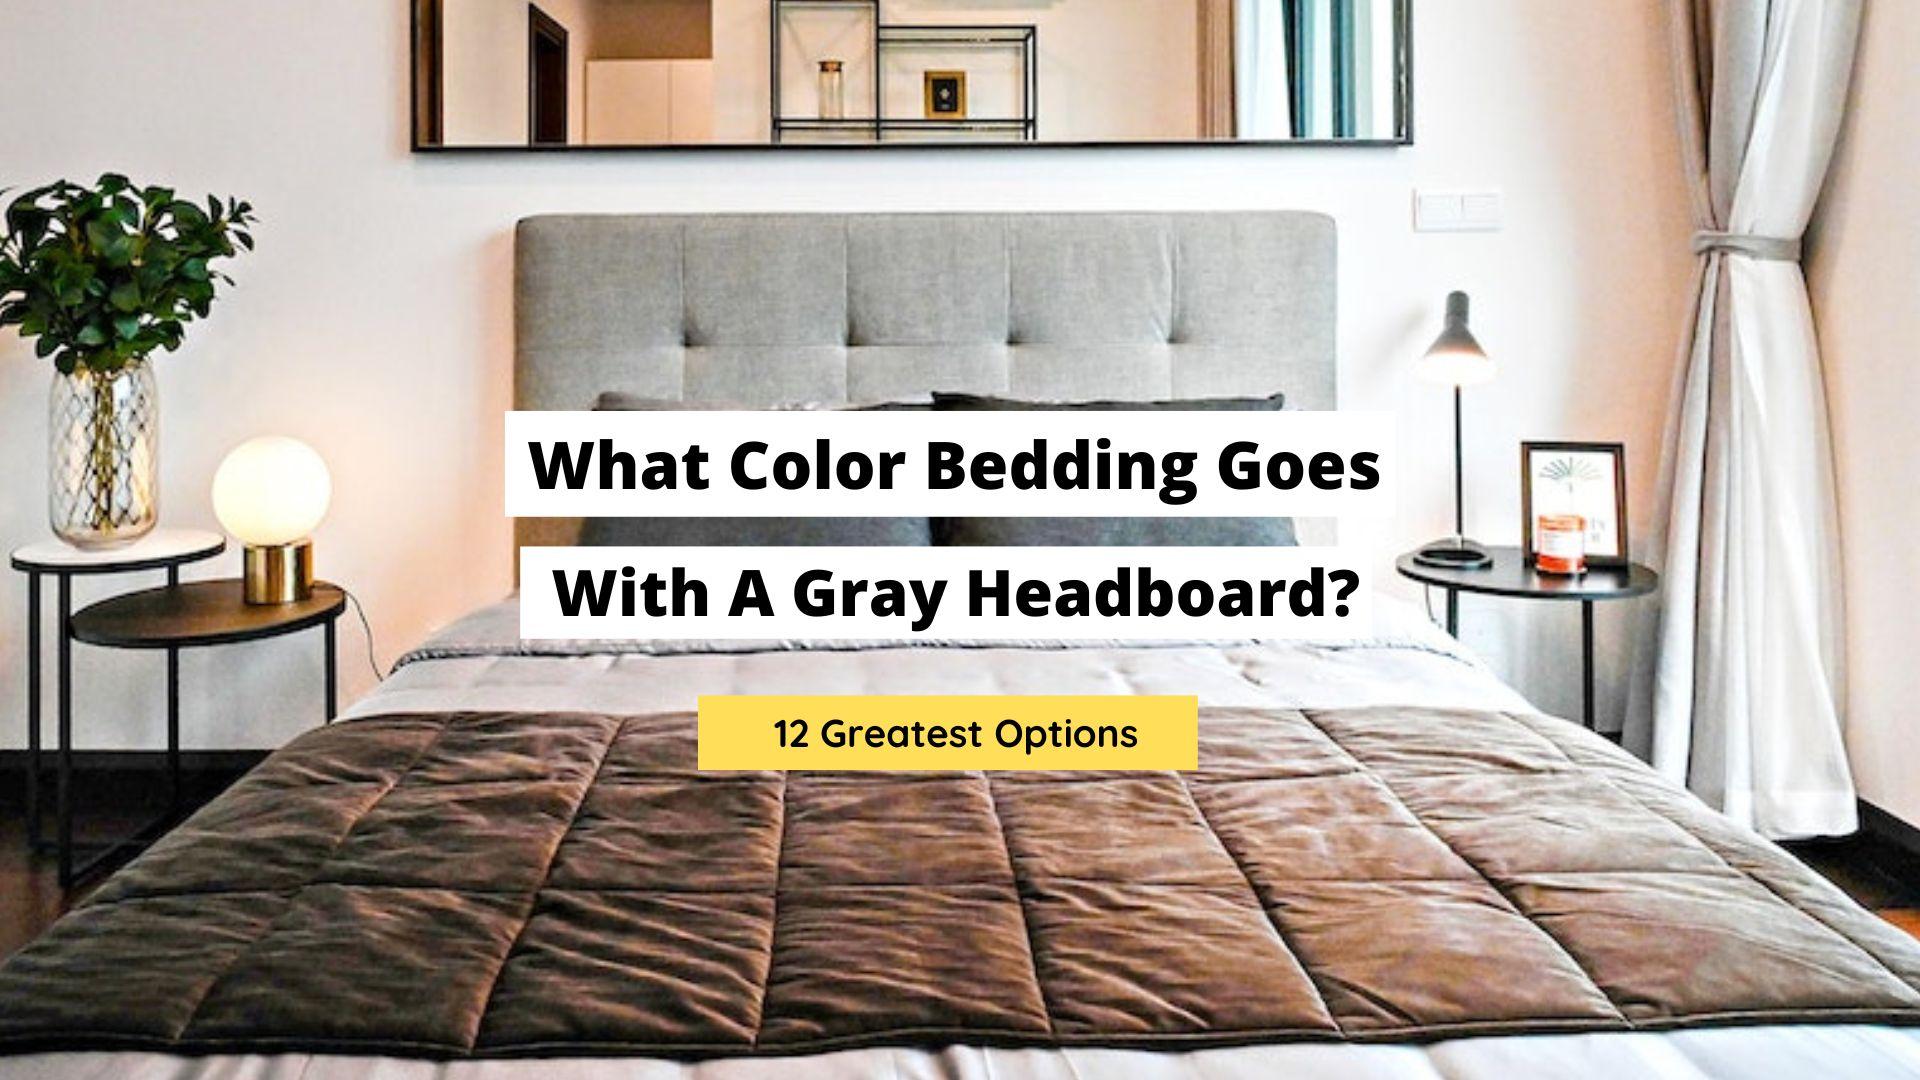 What Color Bedding Goes With A Gray Headboard